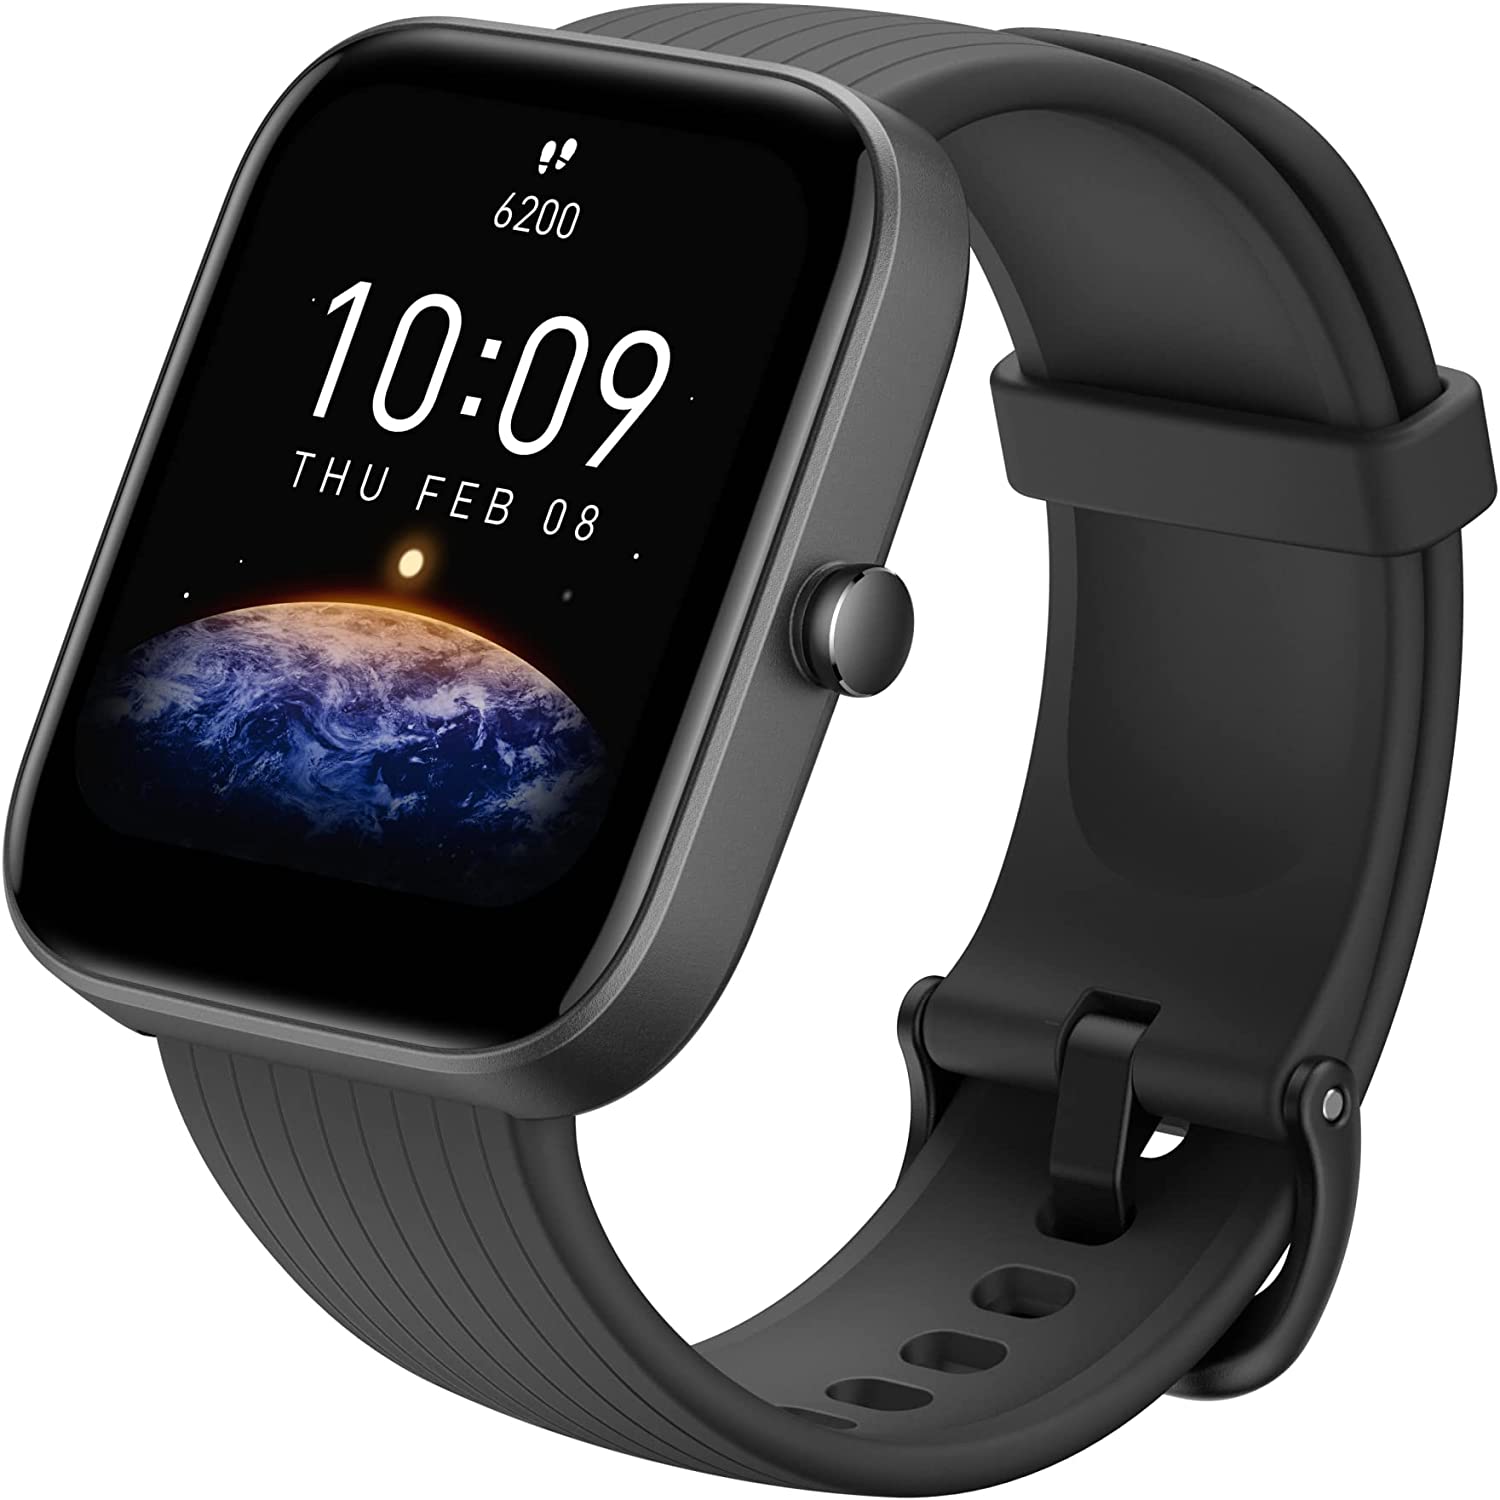 Amazfit Bip 3 Pro Smart Watch for Android iPhone, Black